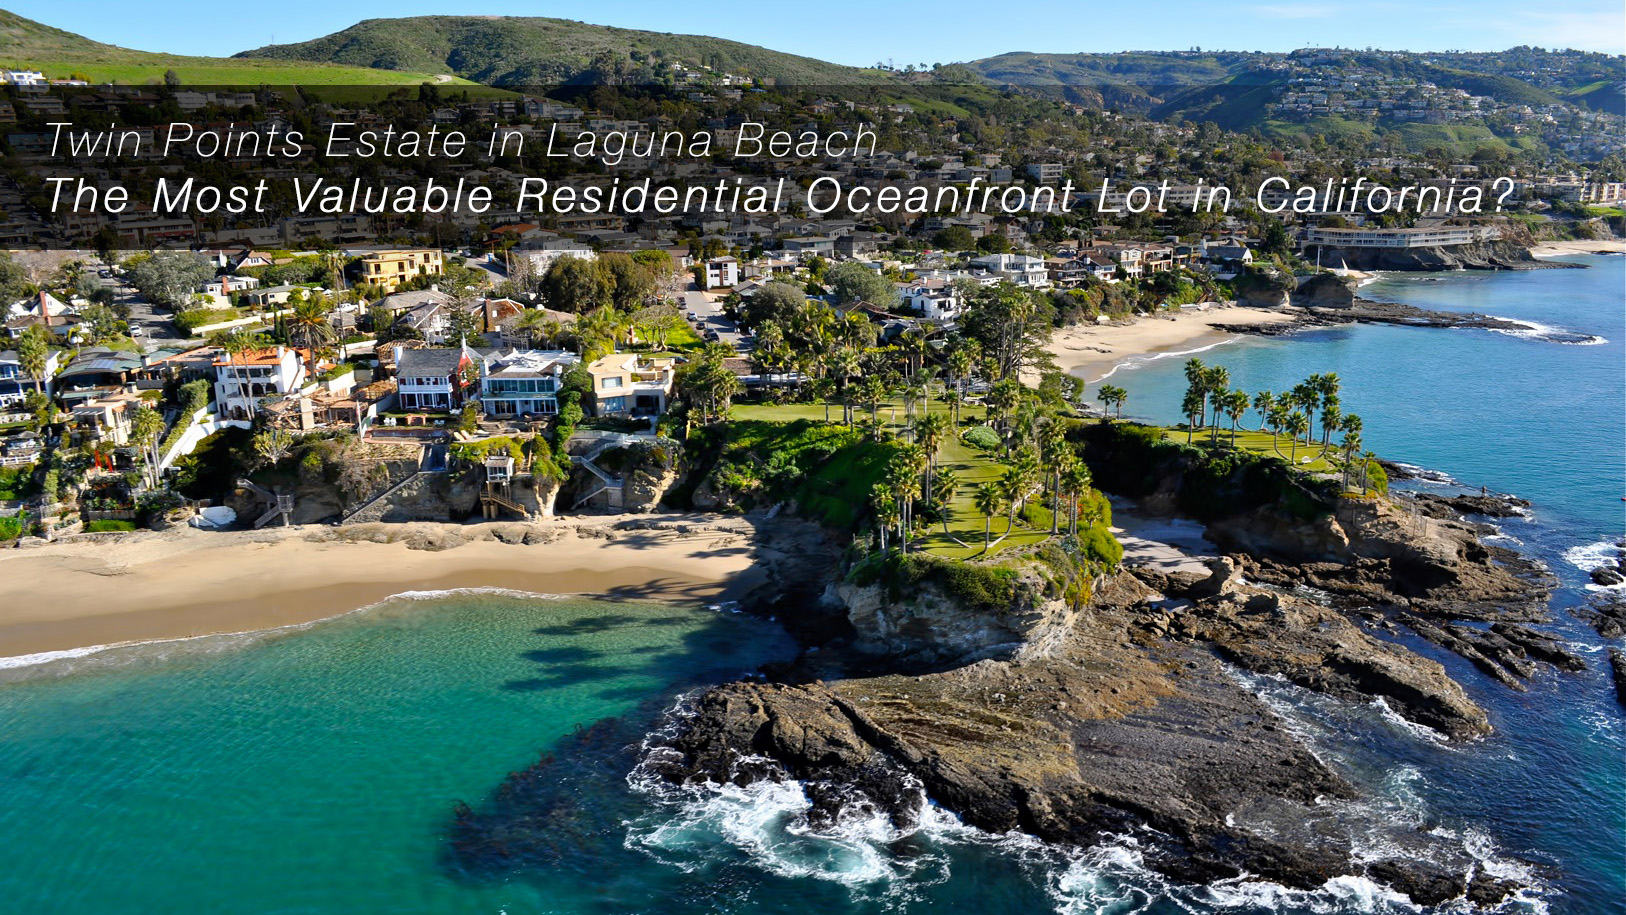 Twin Points Estate in Laguna Beach - The Most Valuable Residential Oceanfront Lot in California?